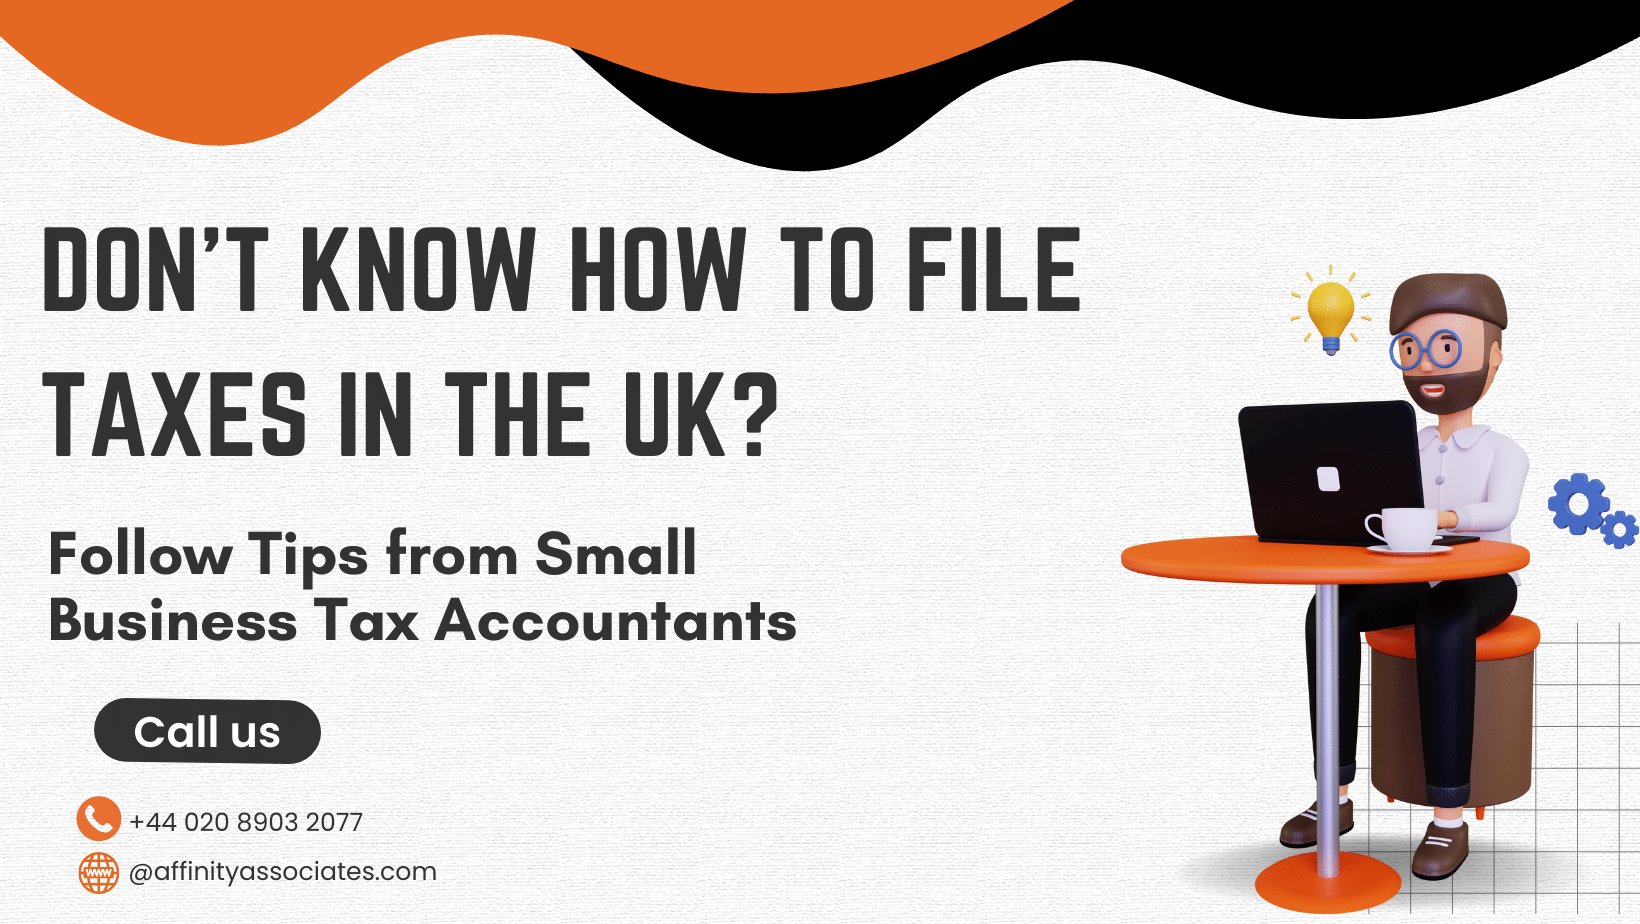 Don’t know how to file taxes in the UK? Follow Tips from Small Business Tax Accountants